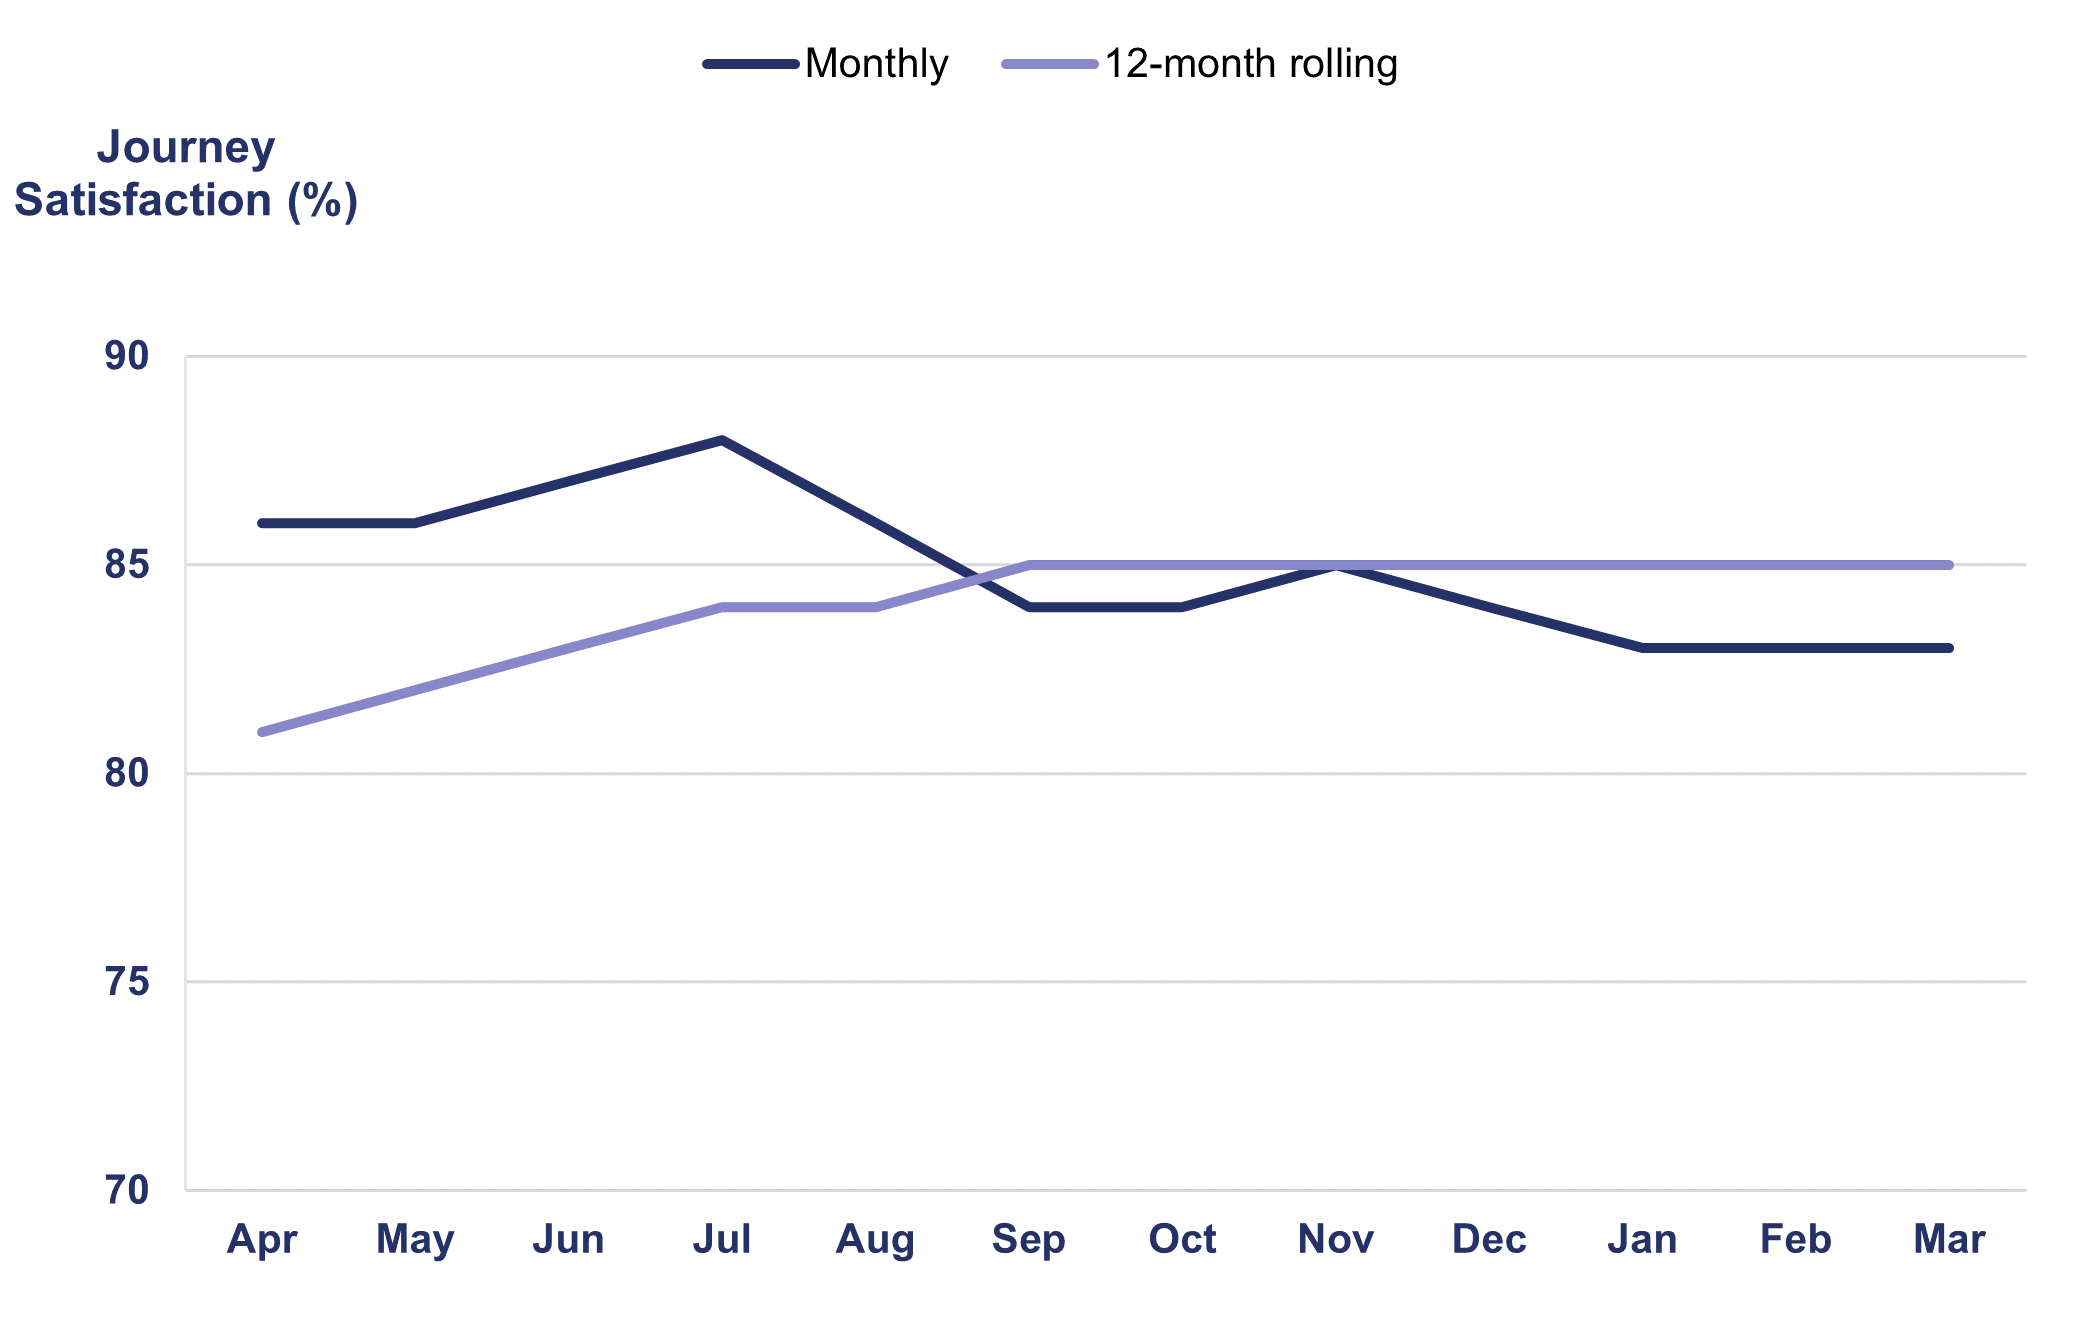 The line chart shows monthly results from National Highways' HighView survey of customer experience. The graph shows two lines; the in-month percentage and a rolling 12-month percentage of those respondents who graded their experience as 'fairly good' or 'very good'. The rolling 12-month score has increased by three percentage points, across the year, from 81% in April 2022. The in-month scores are more variable but have shown a downward trend since July 2022, falling from 88% to 83% in March 2023.